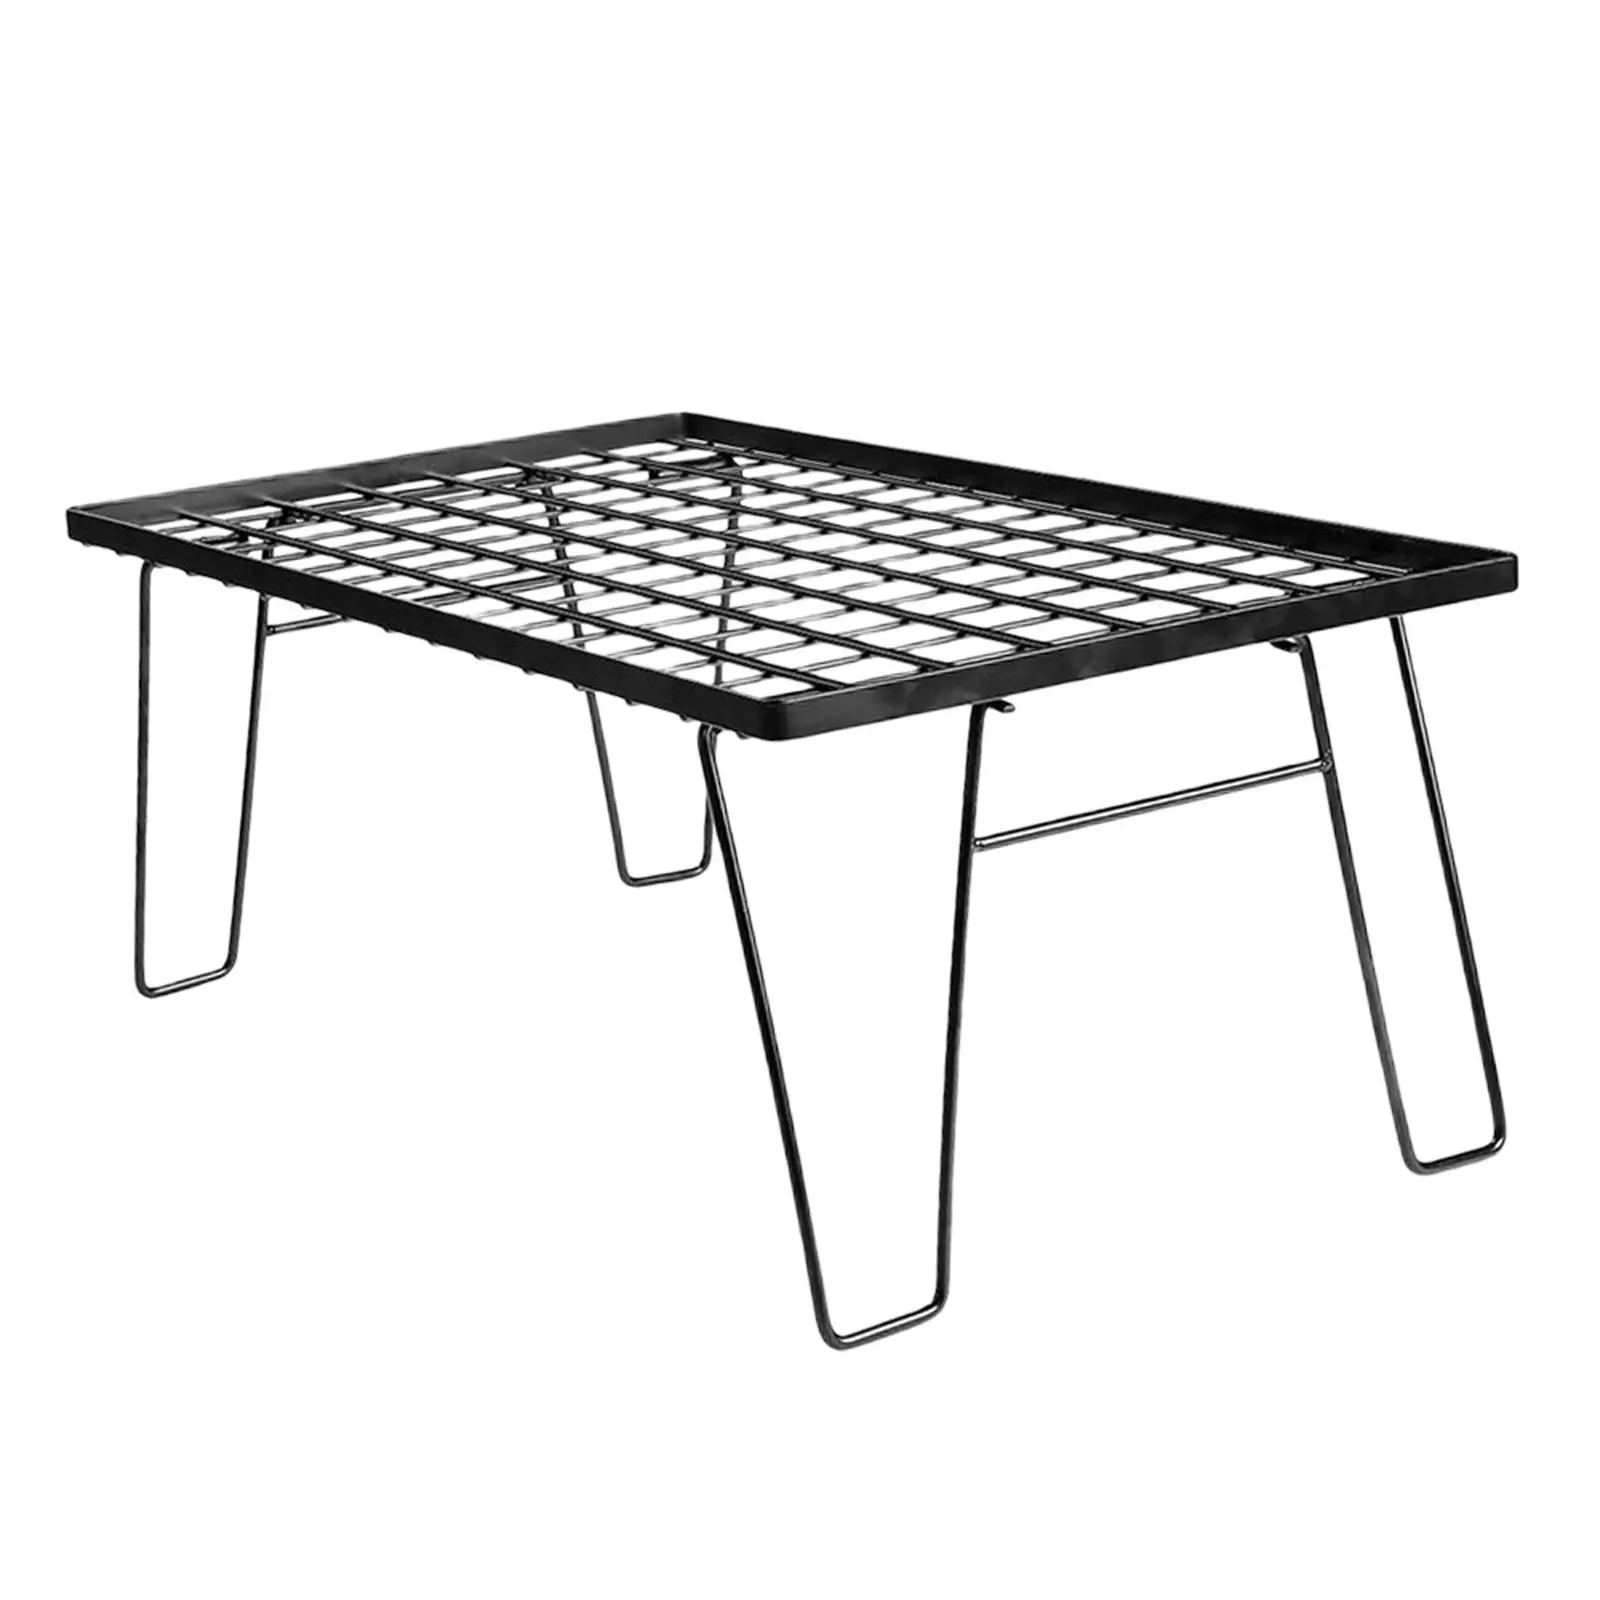 Outdoor Folding Table Lightweight Metal Barbecue Table Multifunctional Desk Furniture Camping Grill Rack for Fishing BBQ Garden